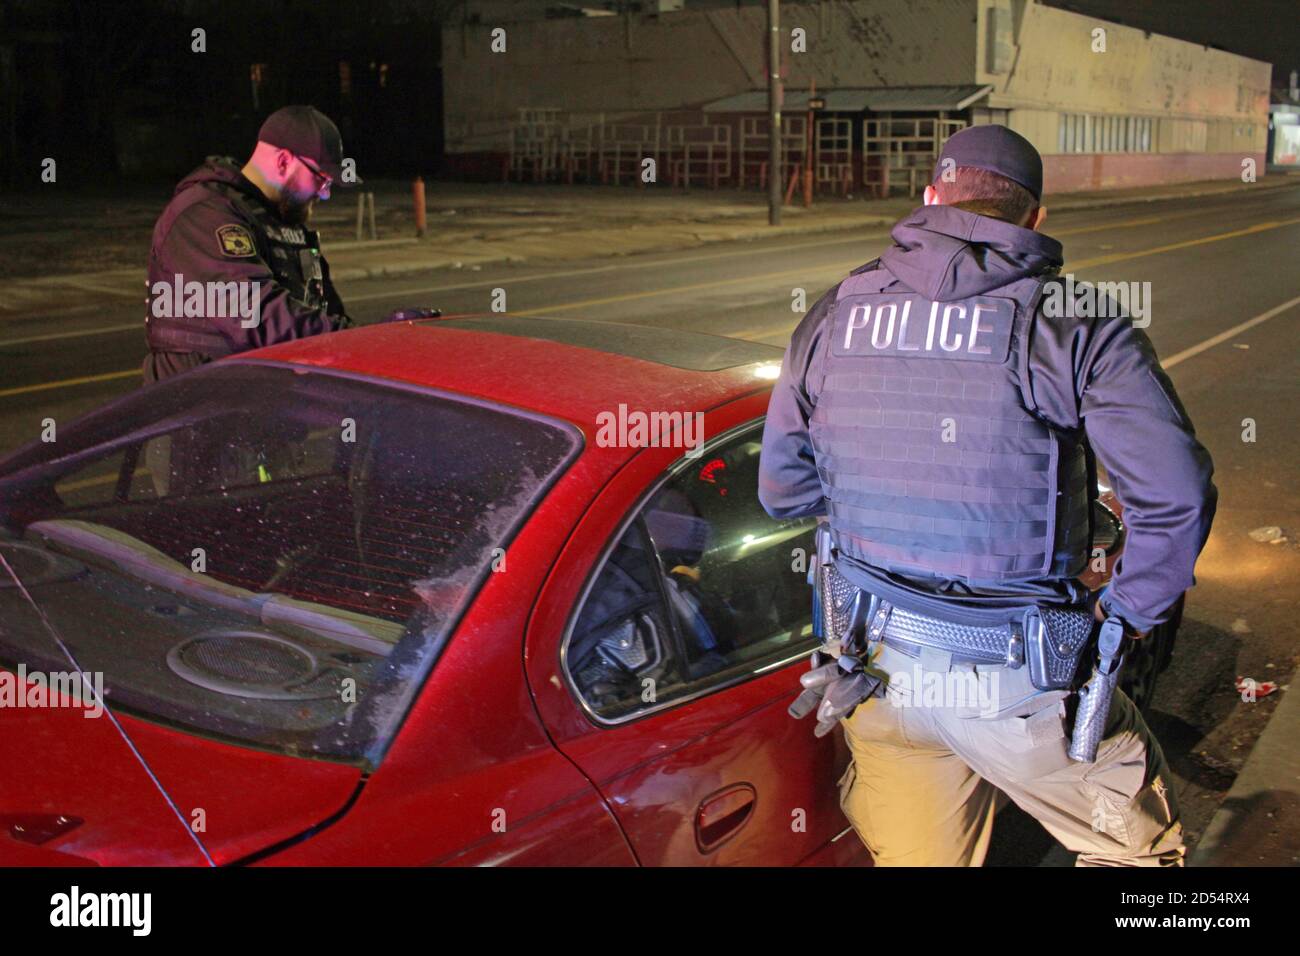 Detroit police officers speak to the driver of a car at night, Detroit, Michigan, USA Stock Photo